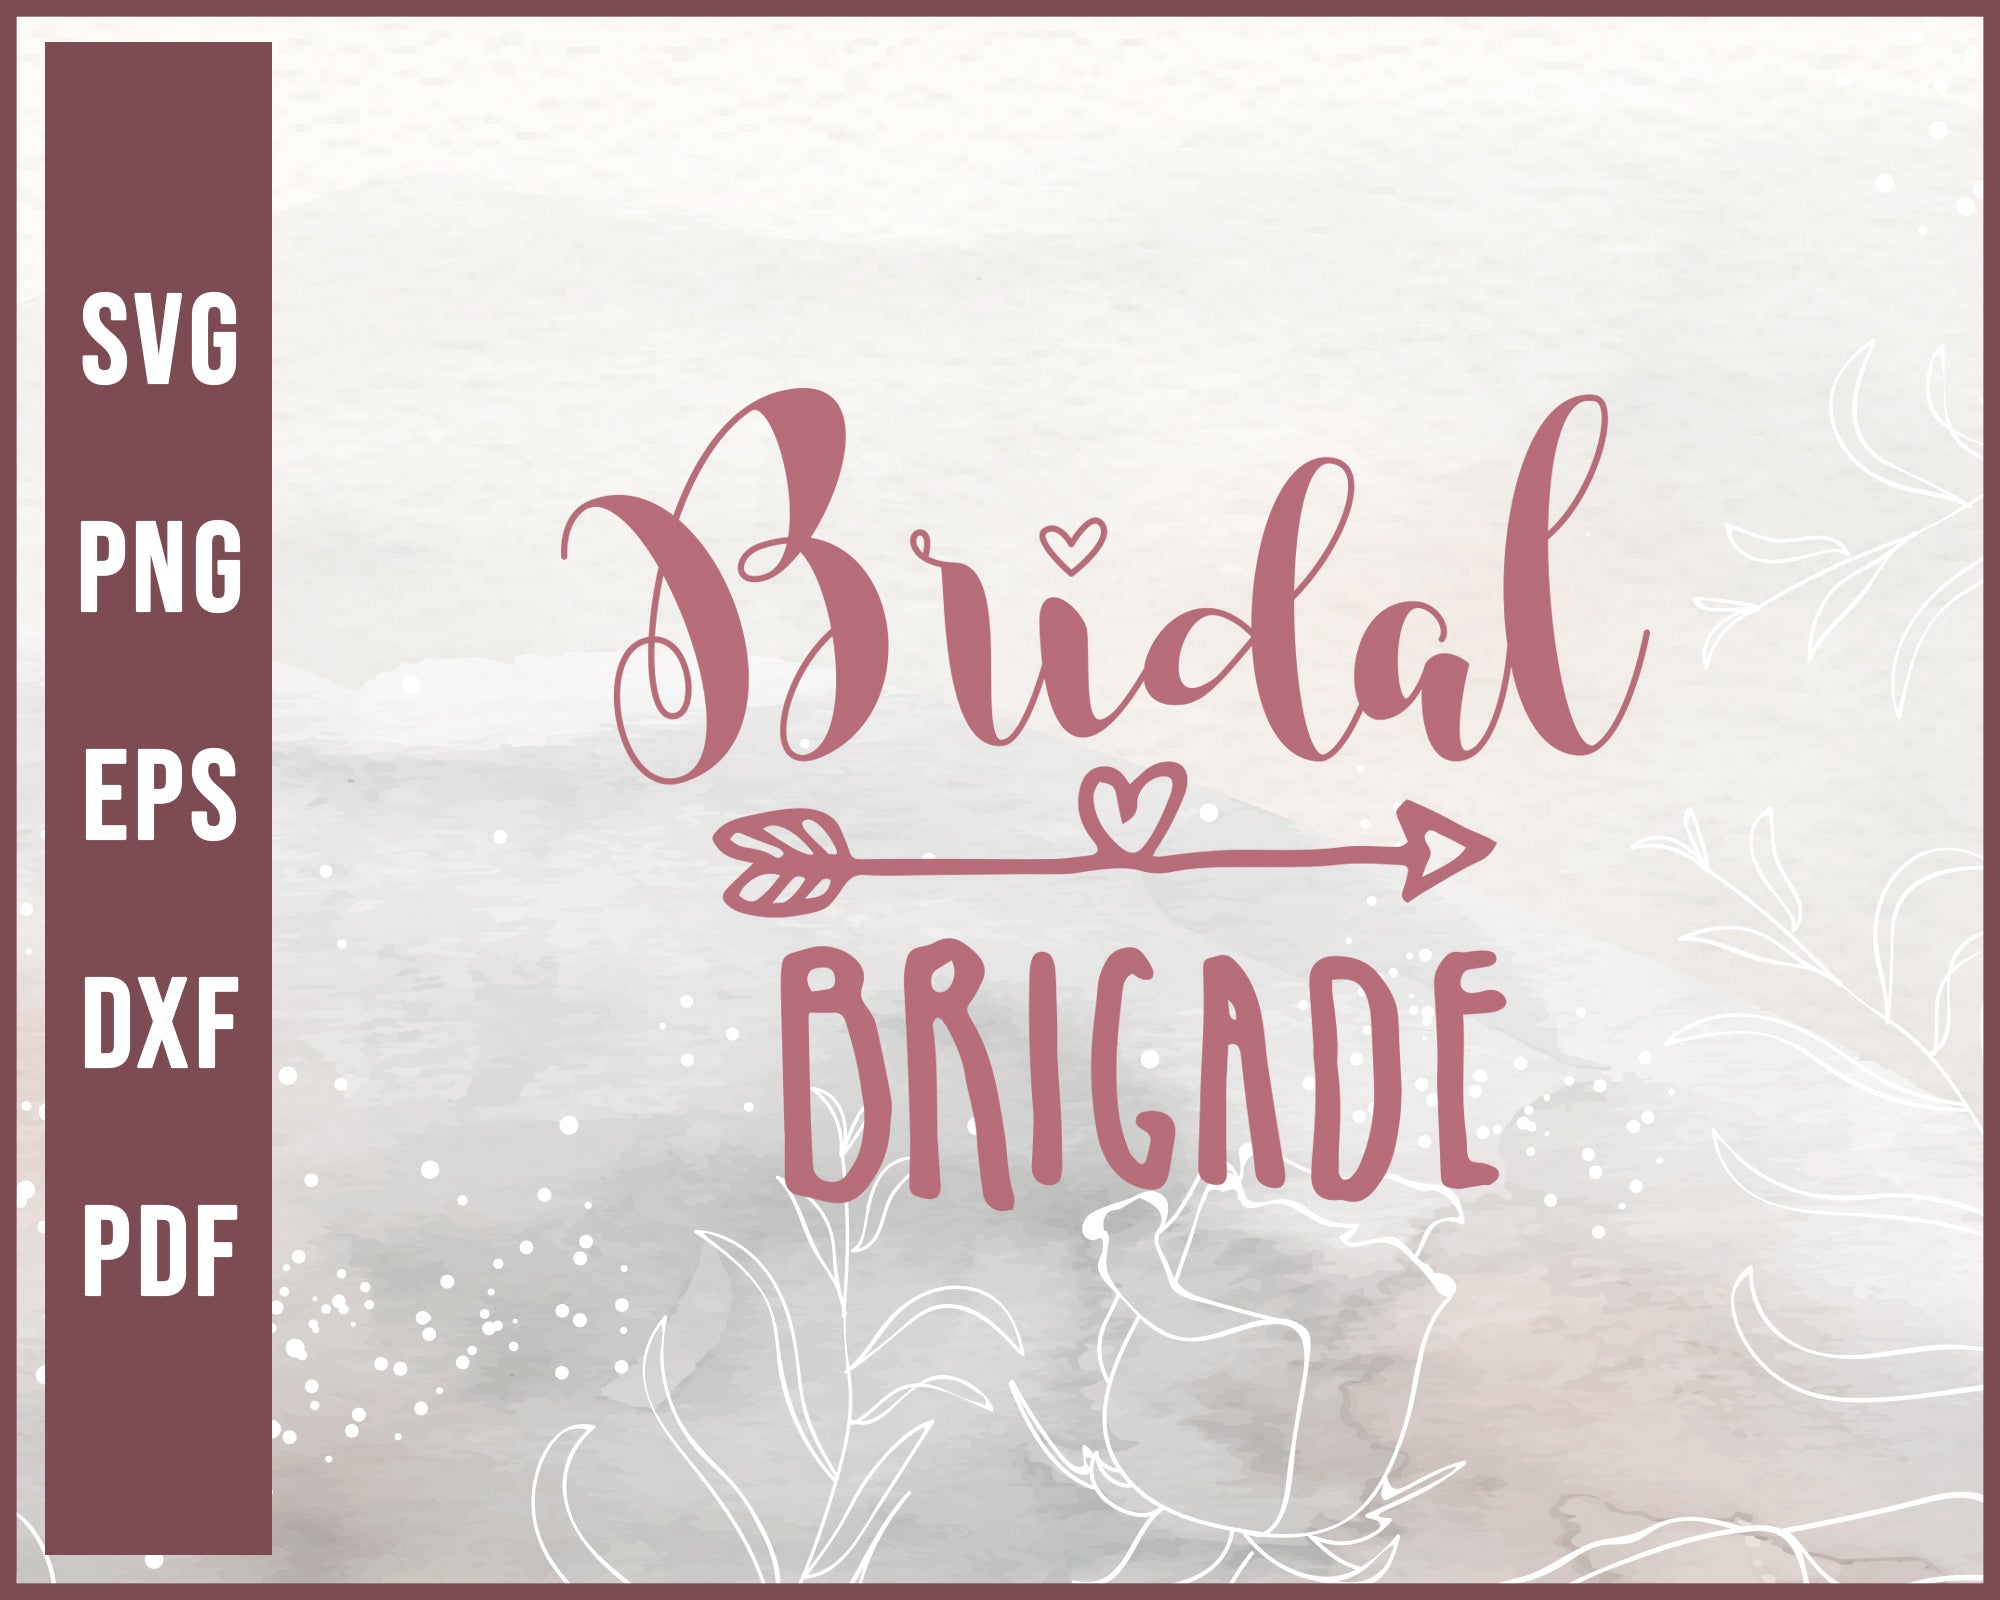 Bridal Brigade Wedding svg Designs For Cricut Silhouette And eps png Printable Files